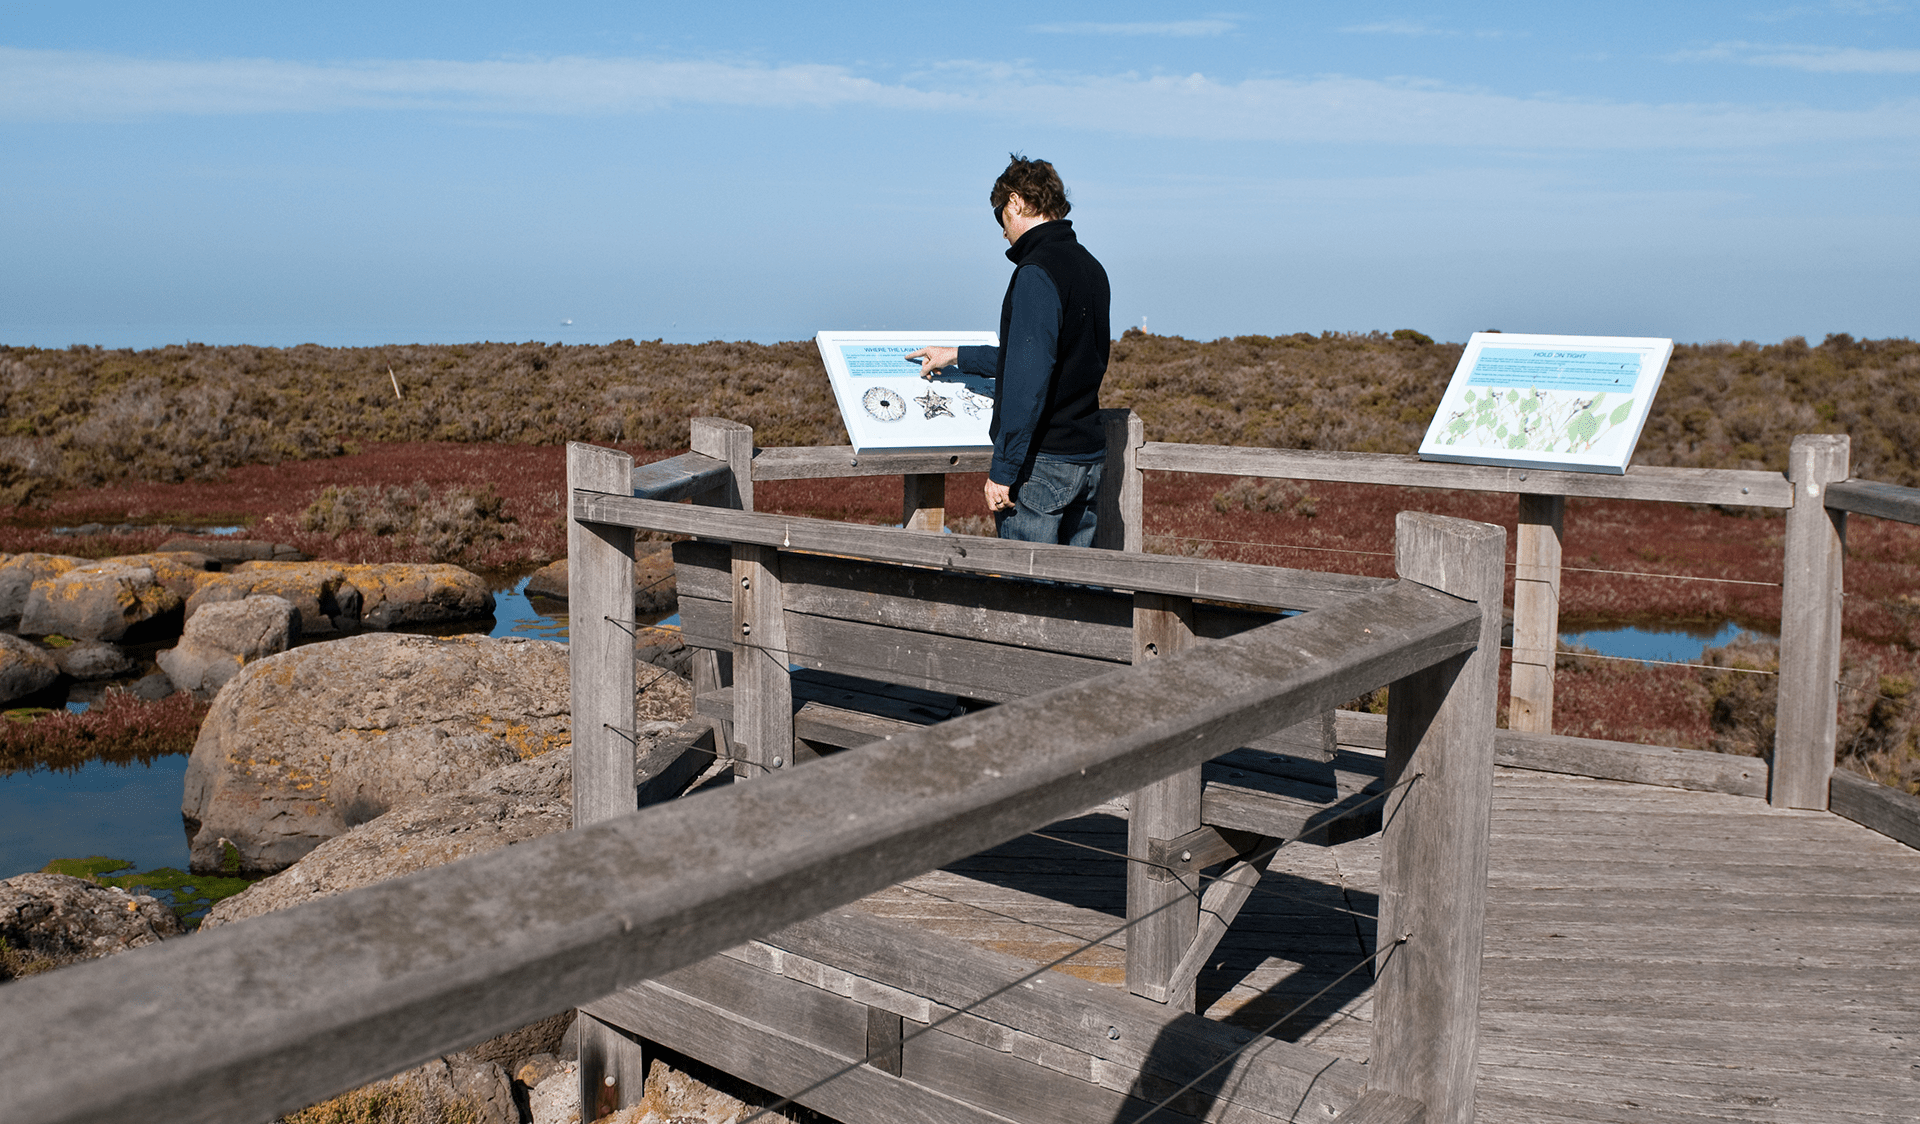 A man reads an information sign at Jawbone Marine Sanctuary